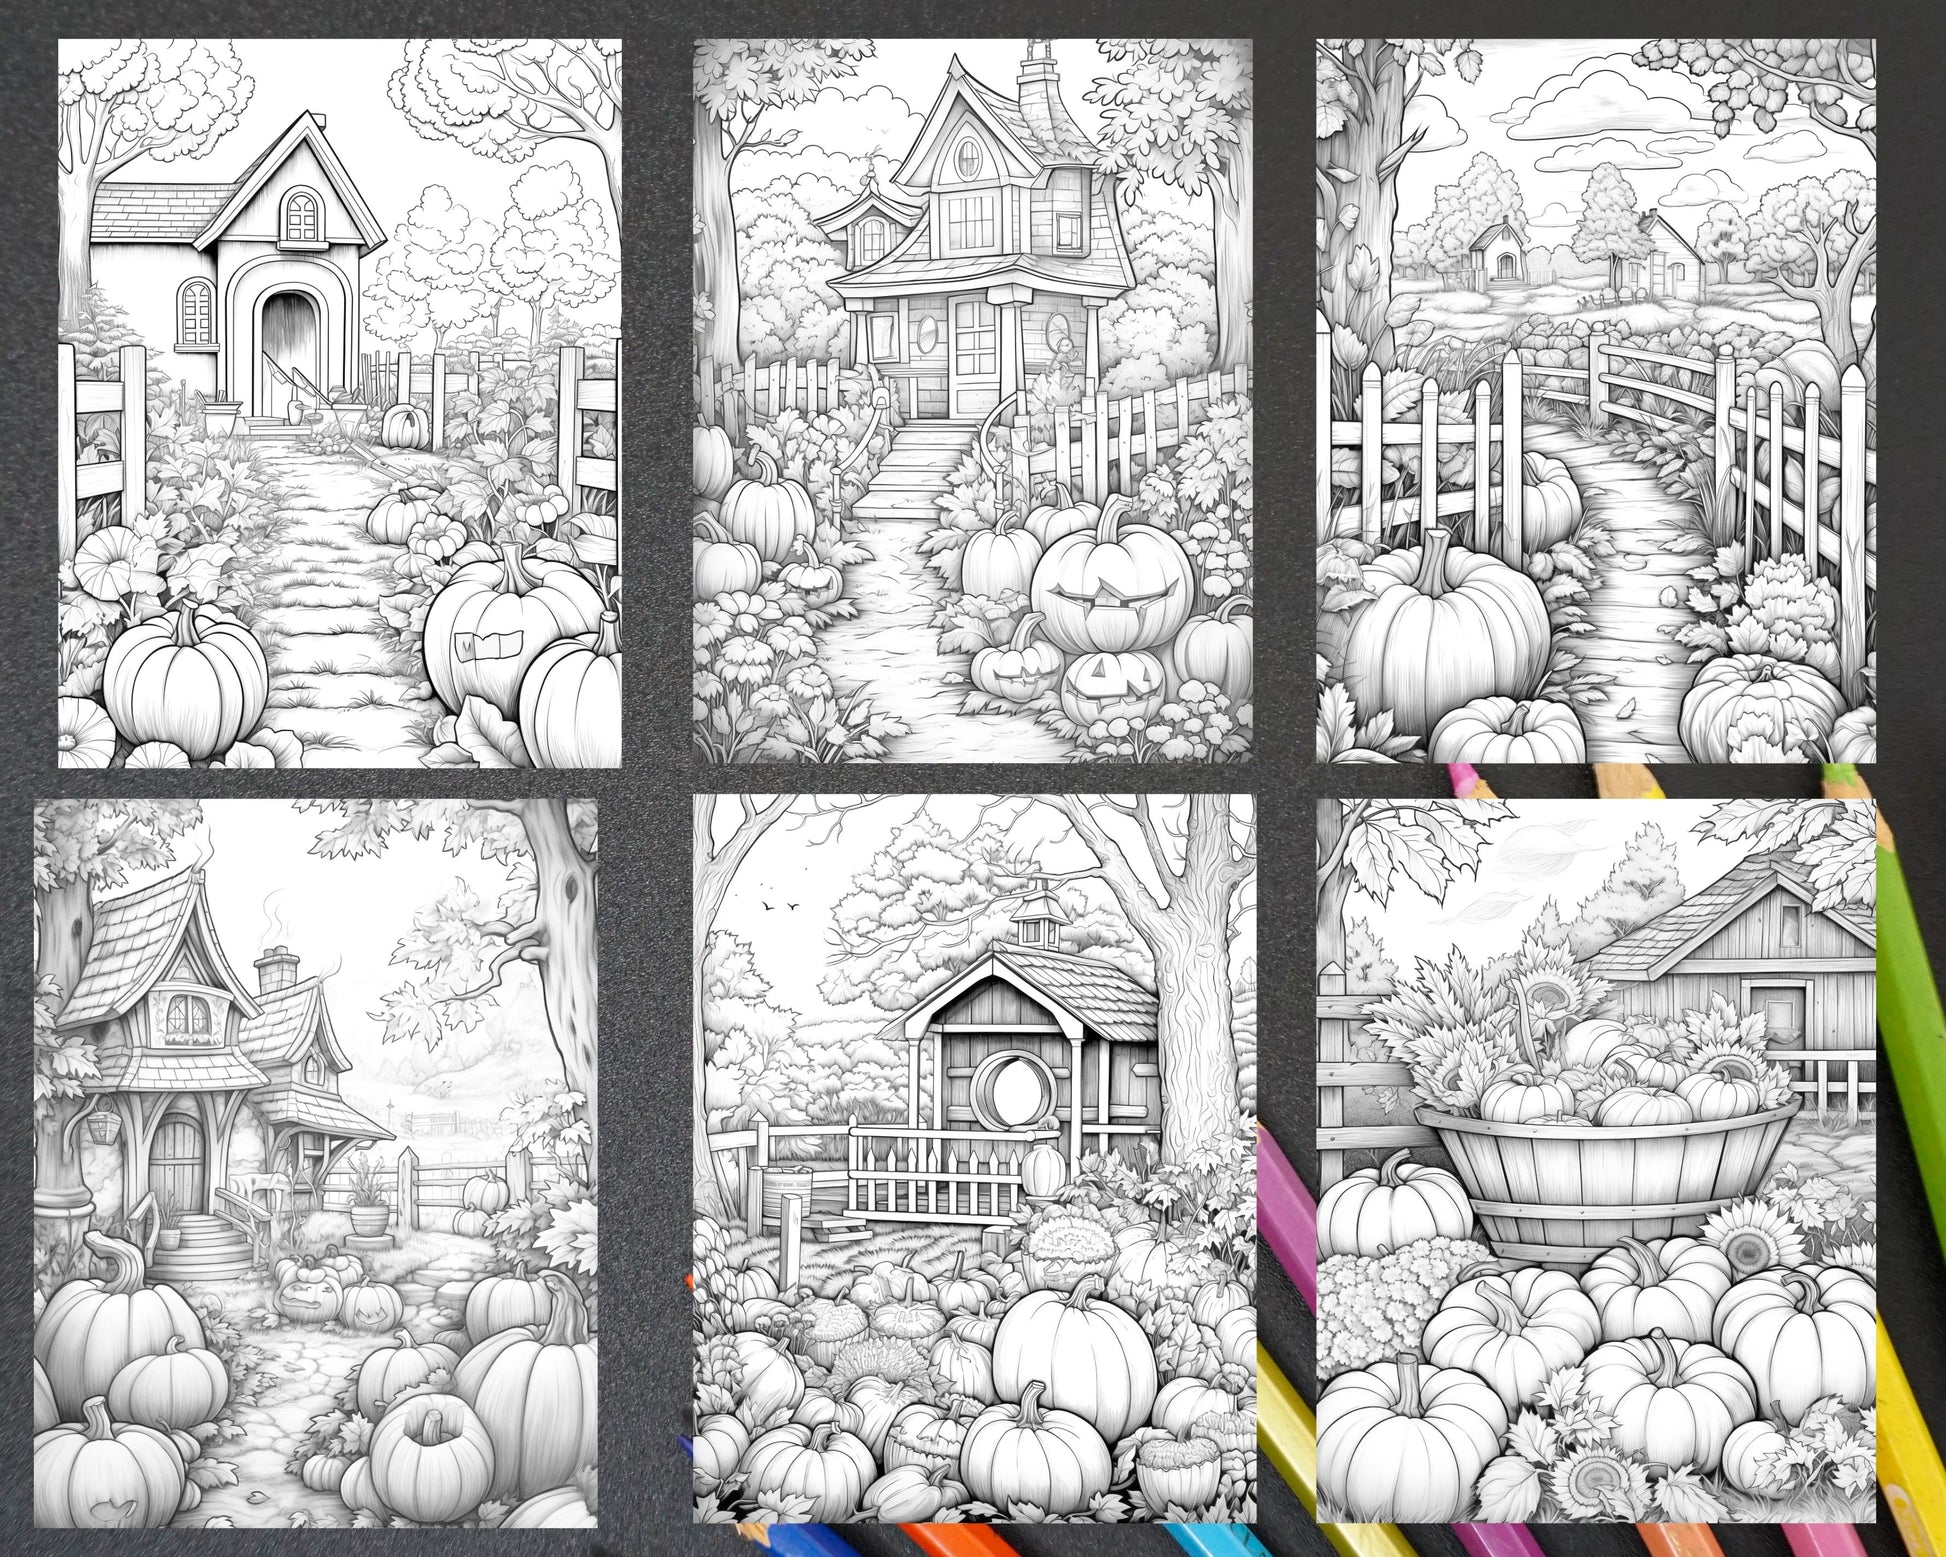 grayscale coloring pages, printable art, pumpkin garden scenery, adult coloring, fall art, autumn coloring pages, halloween coloring pages, fall coloring pages